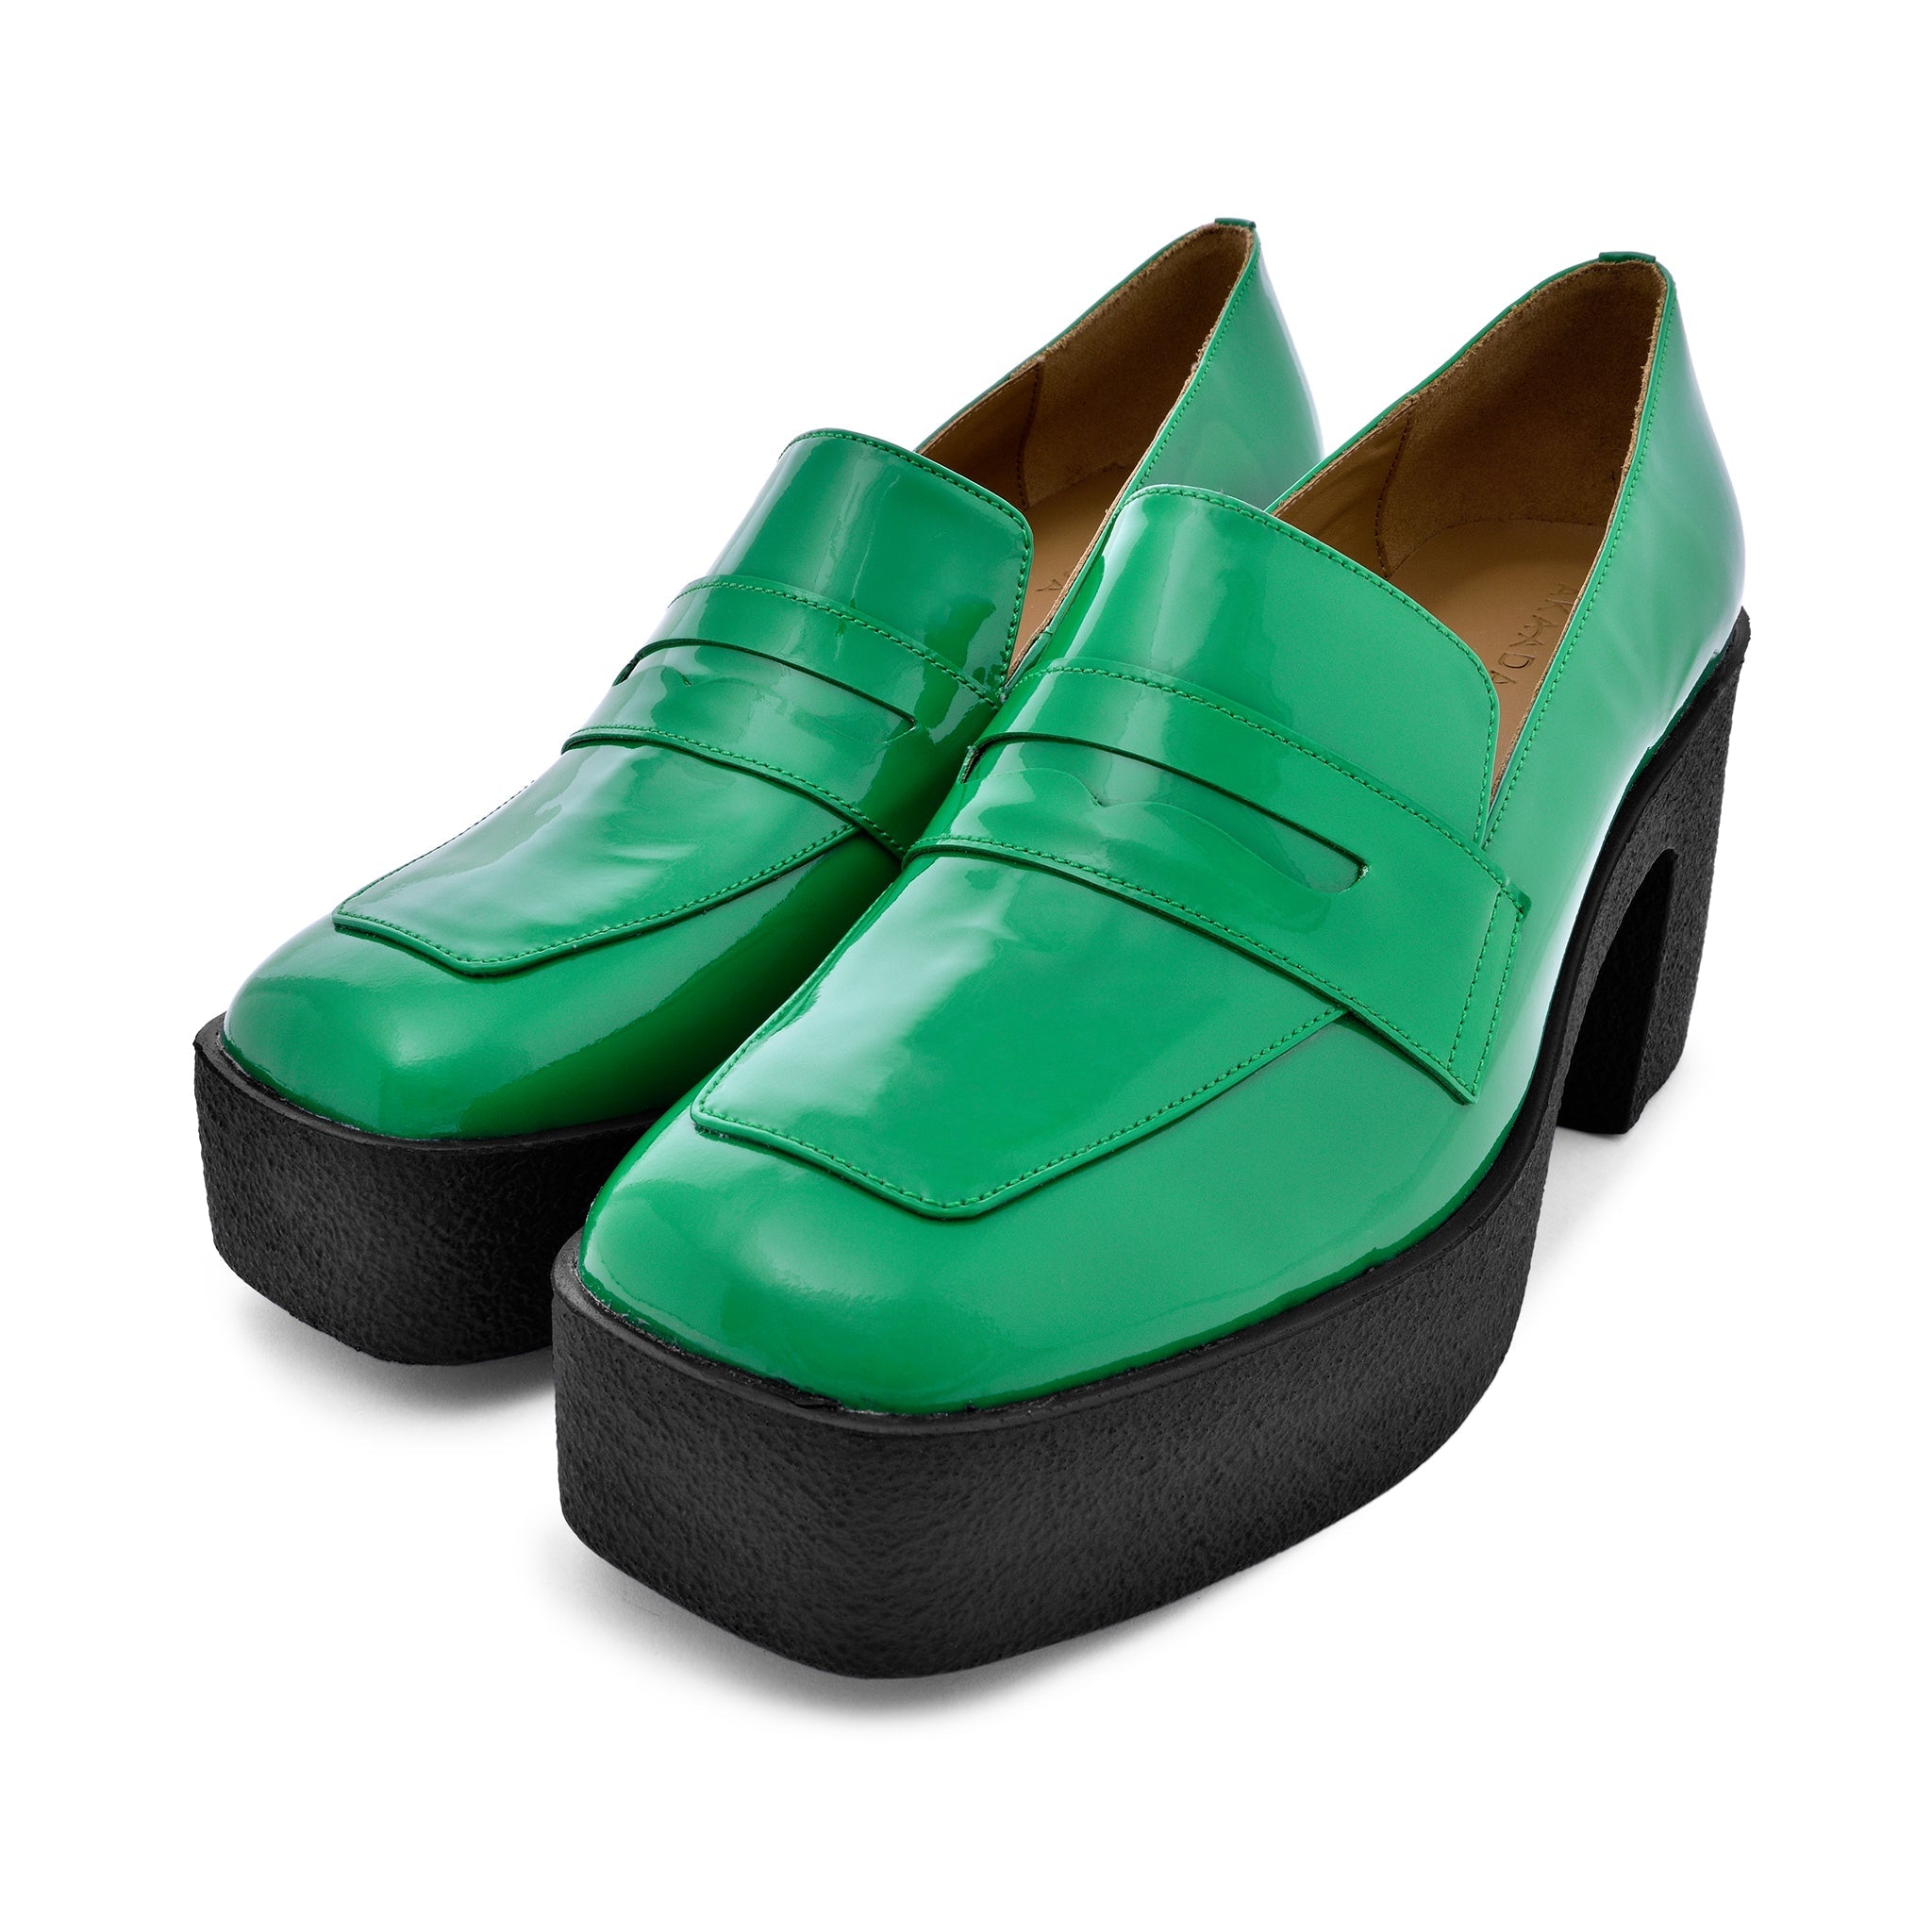 Yoko Forest Green Patent Leather Chunky Loafers 21031-01-08 - 8